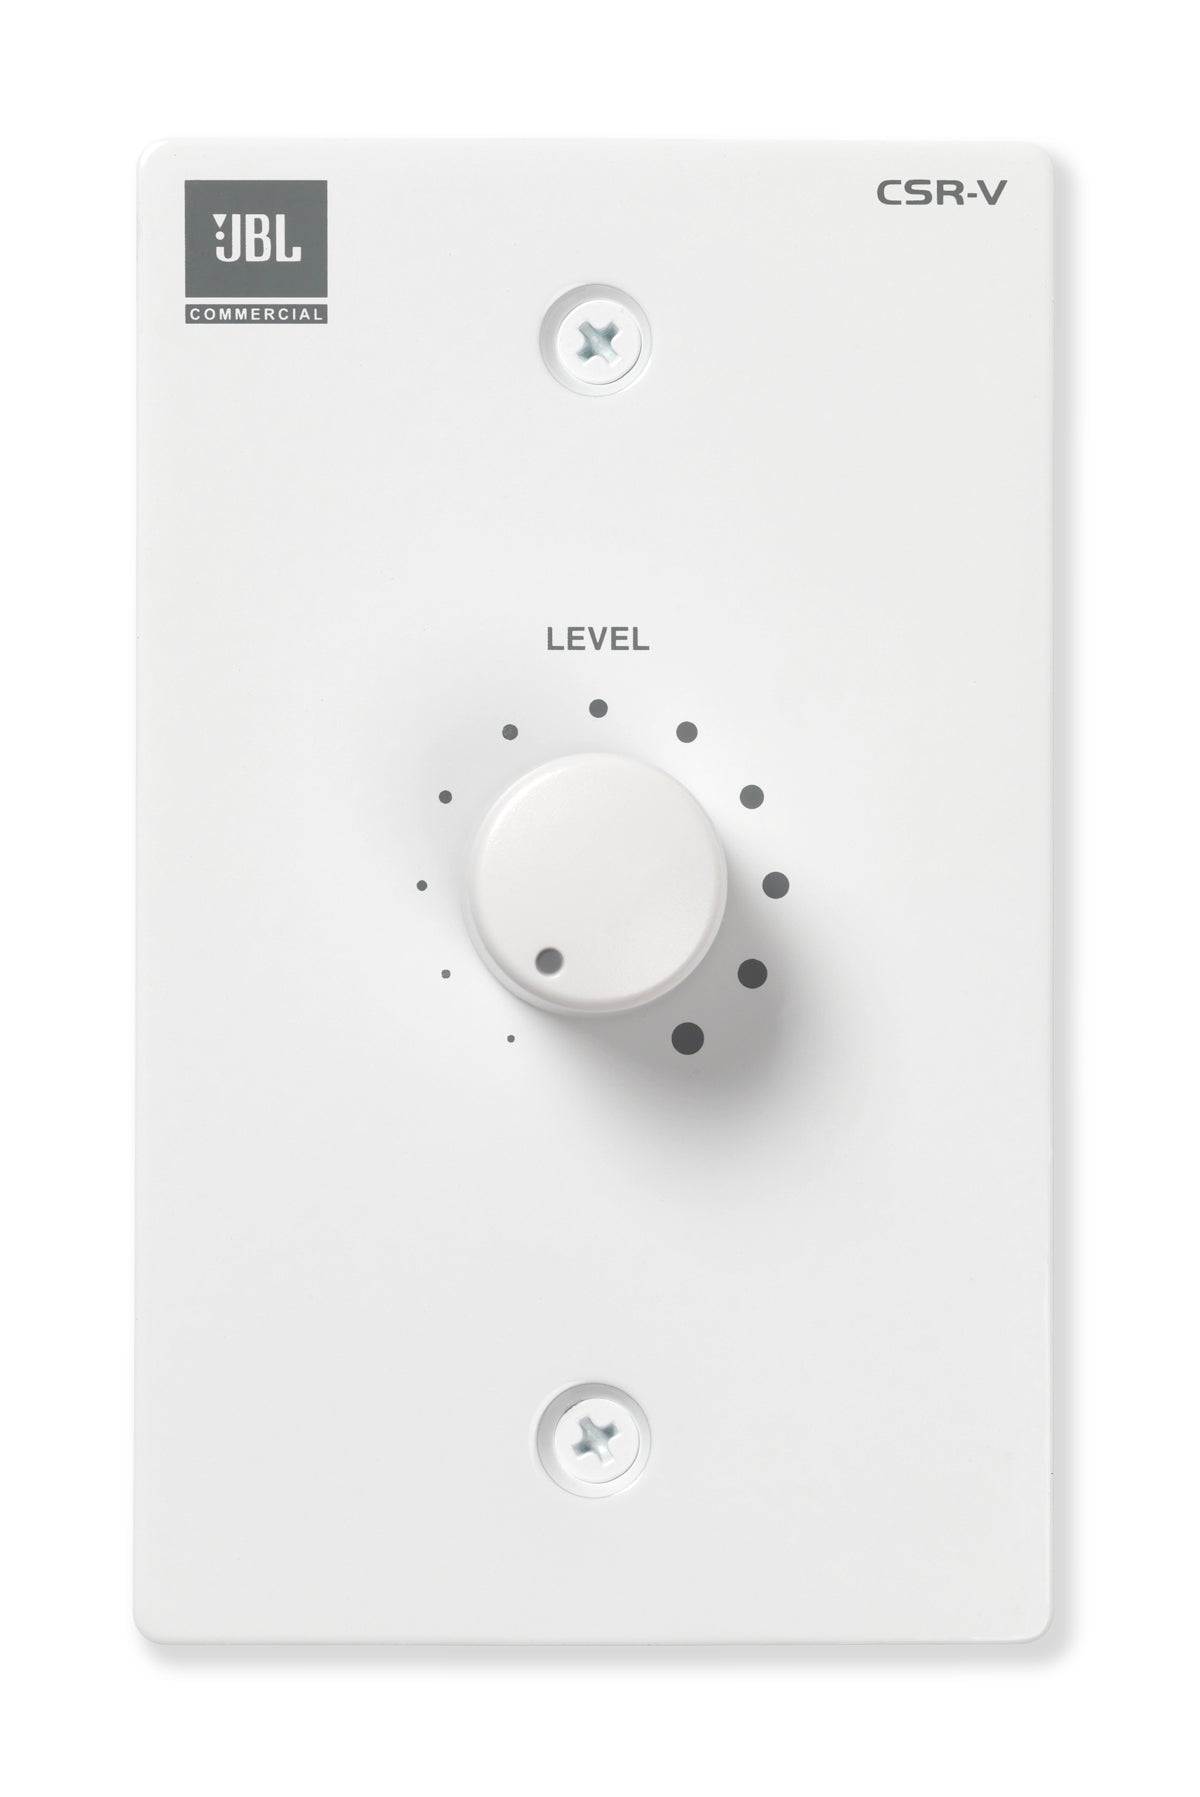 CSRVWHT Wall Controller with Volume Control